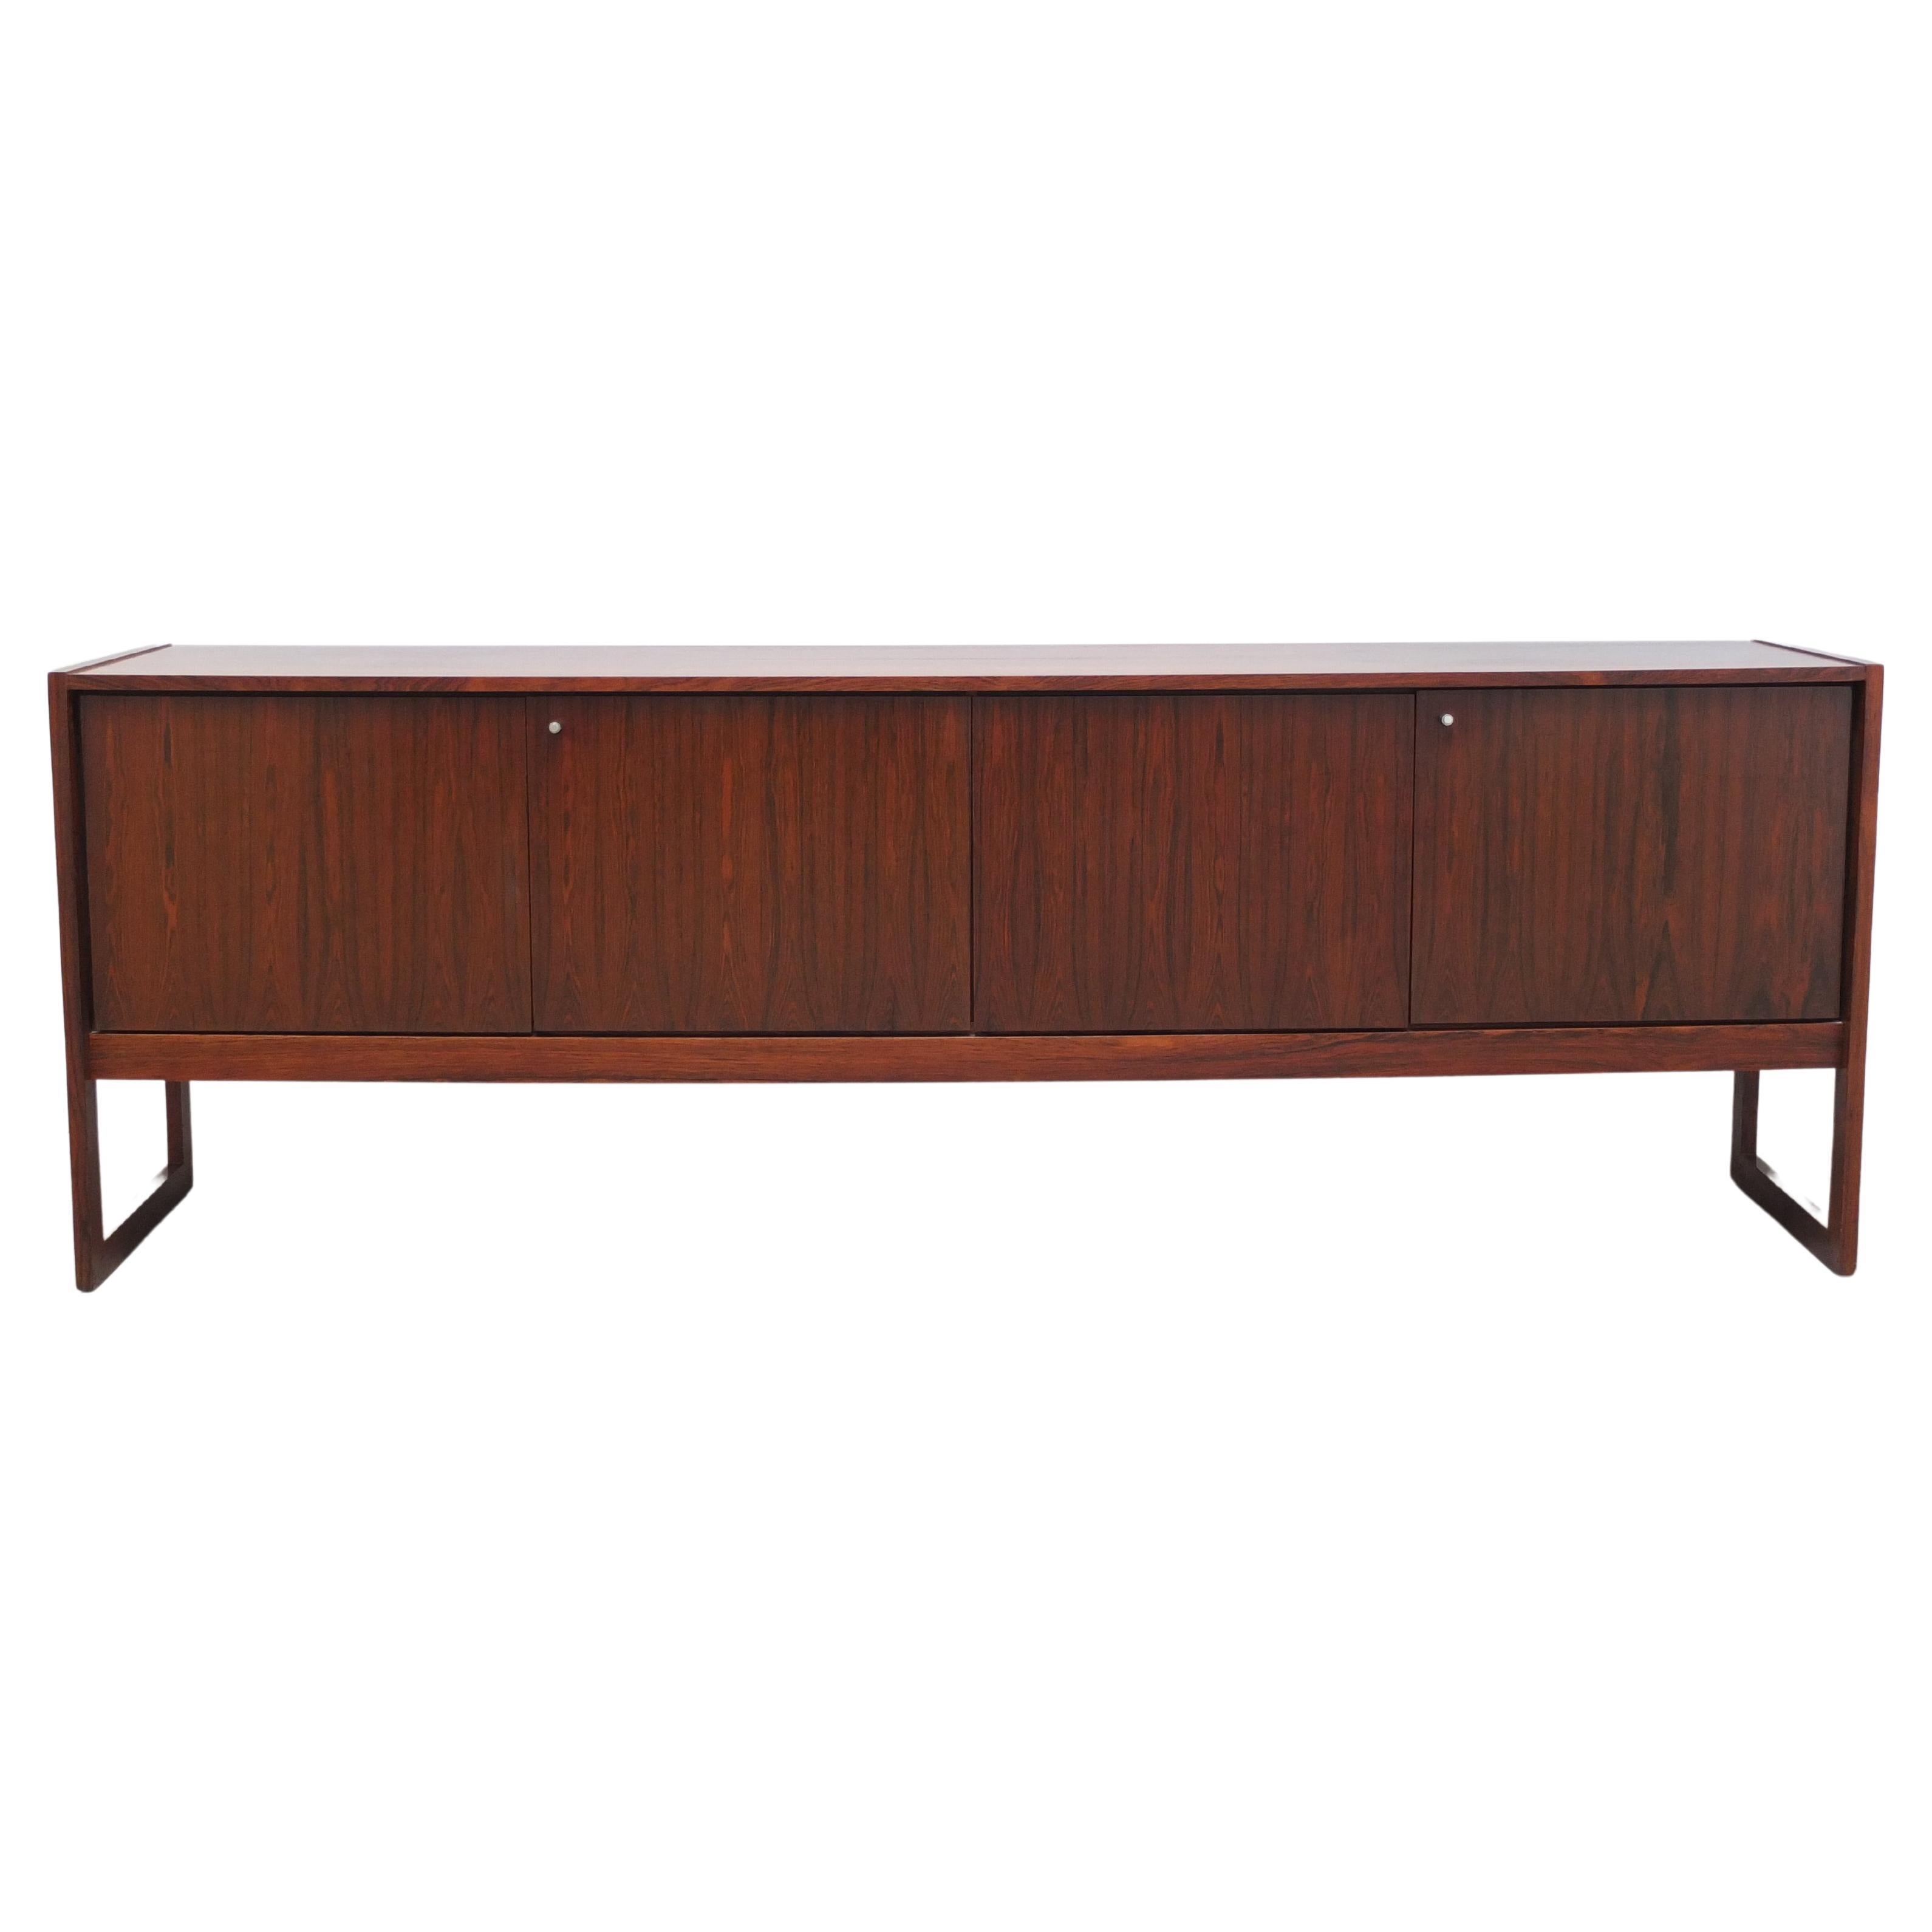 Large Exclusive 'Tecton' Sideboard by V-Form, 1960s For Sale